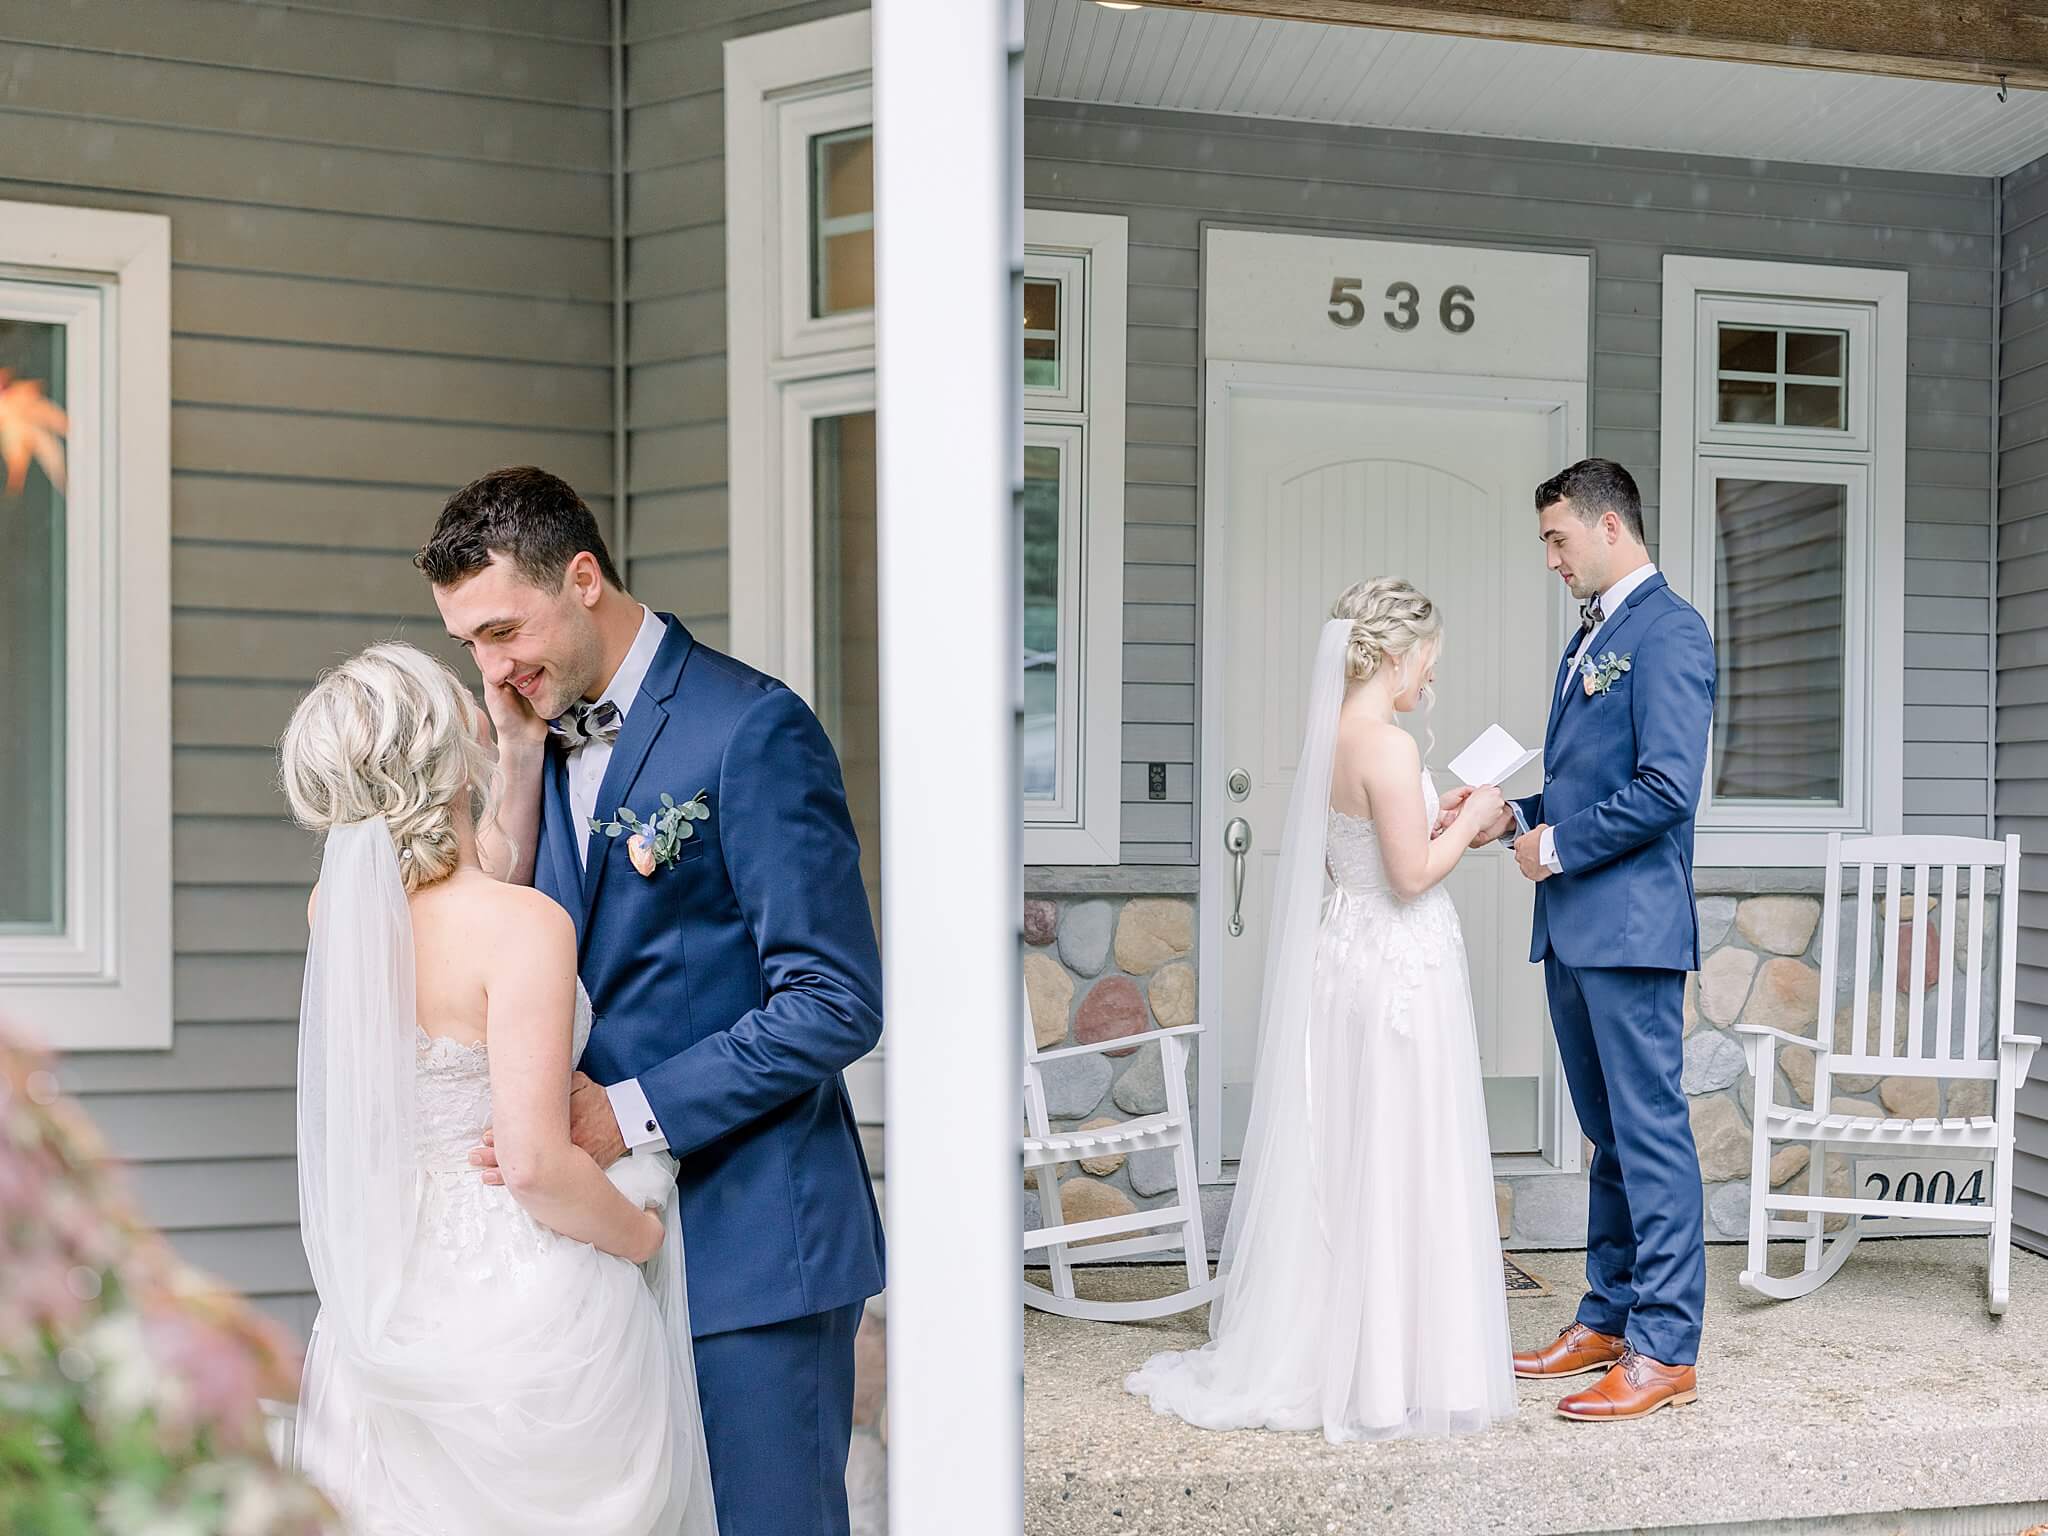 Bride and groom share intimate first look moment and private vows on a covered porch during romantic, rainy Traverse City wedding.